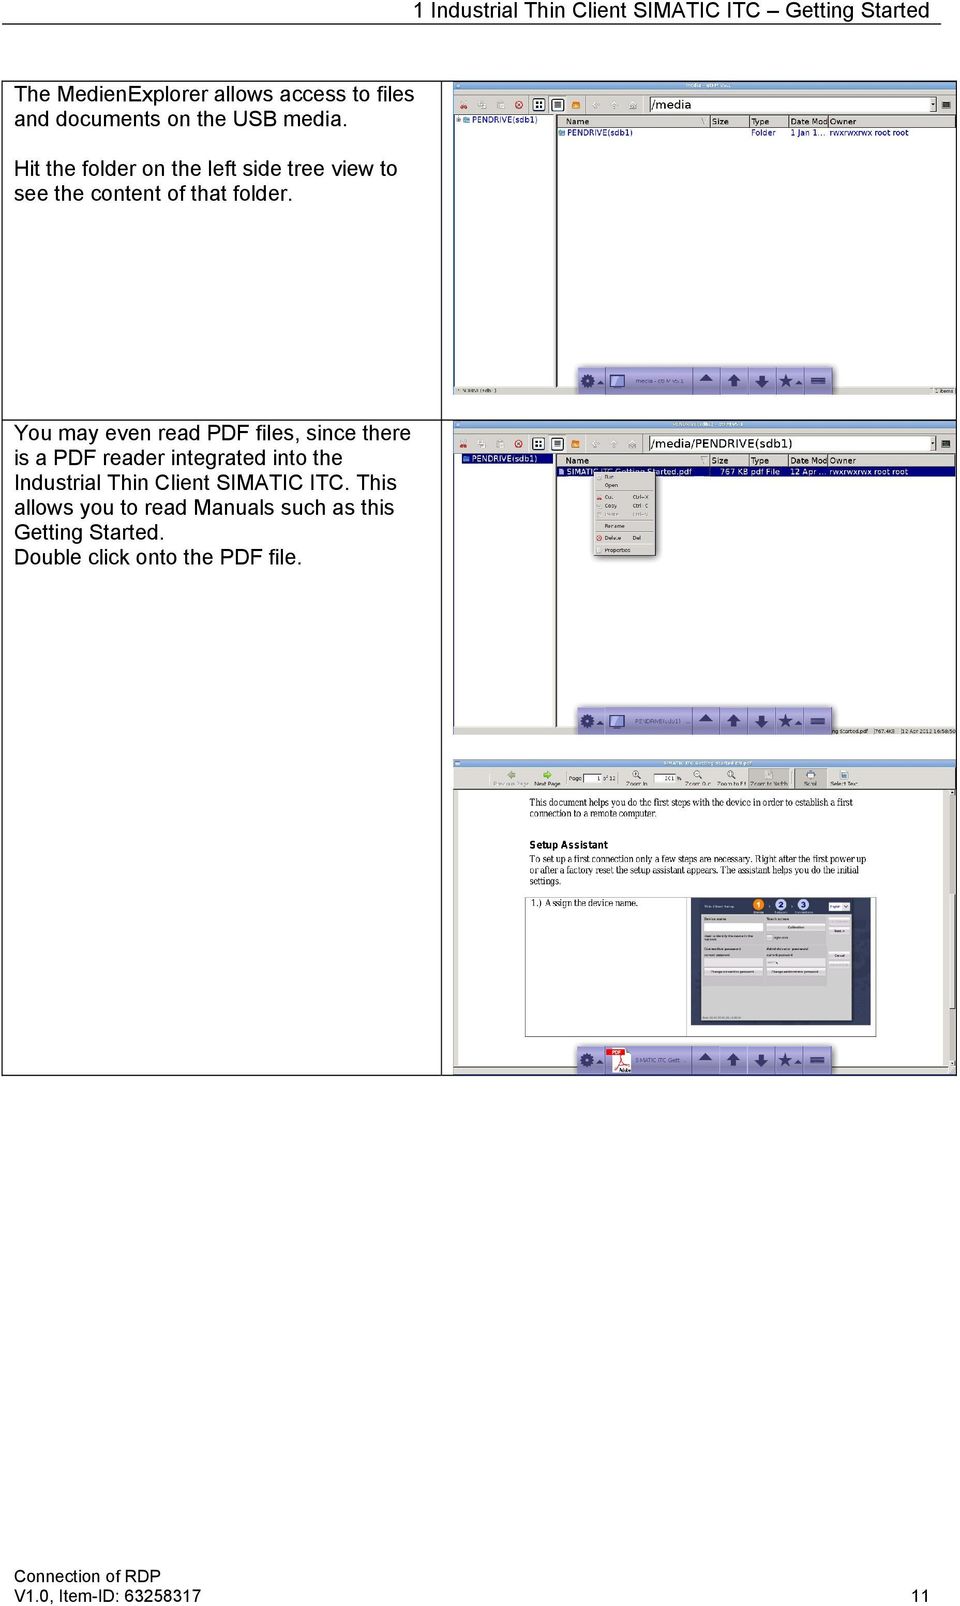 You may even read PDF files, since there is a PDF reader integrated into the Industrial Thin